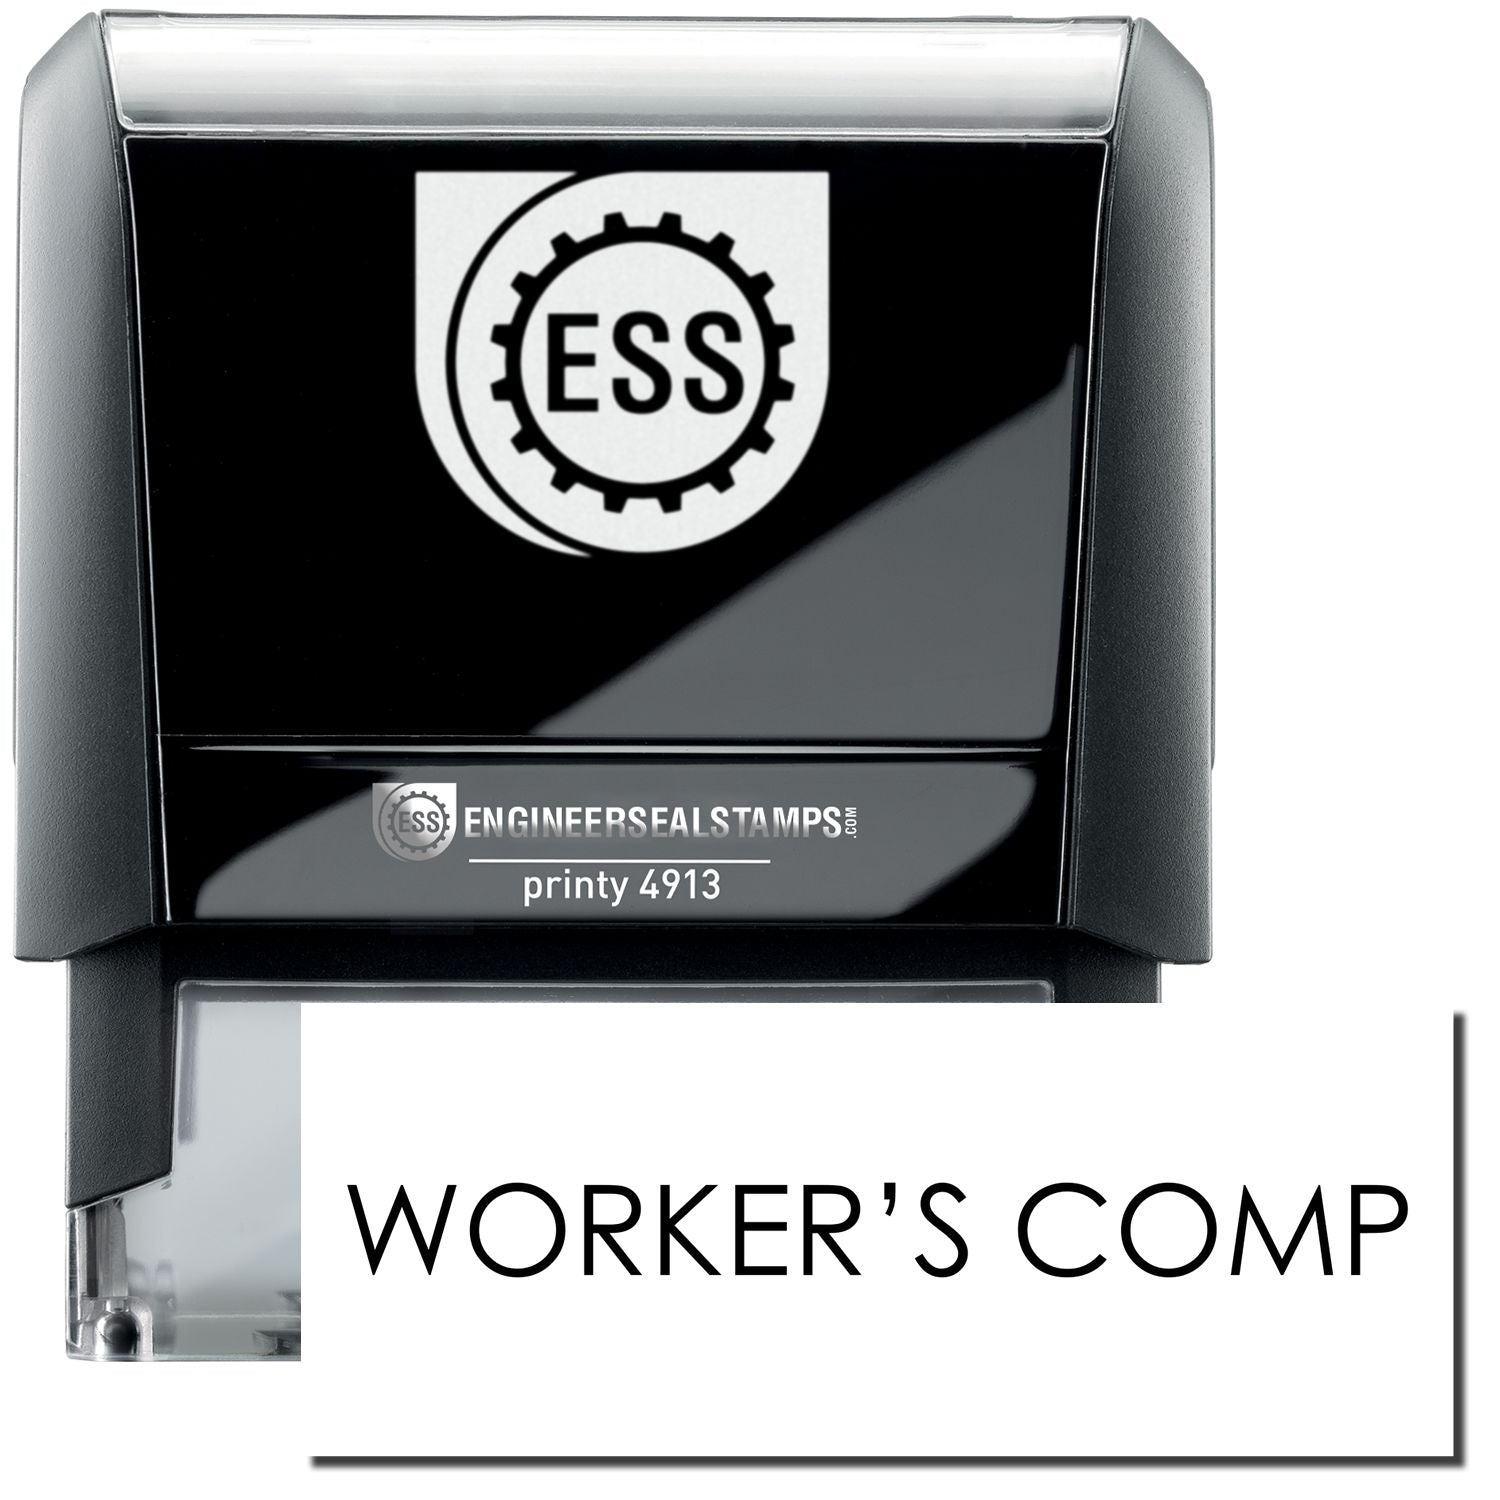 A self-inking stamp with a stamped image showing how the text "WORKER'S COMP" in a large font is displayed by it.